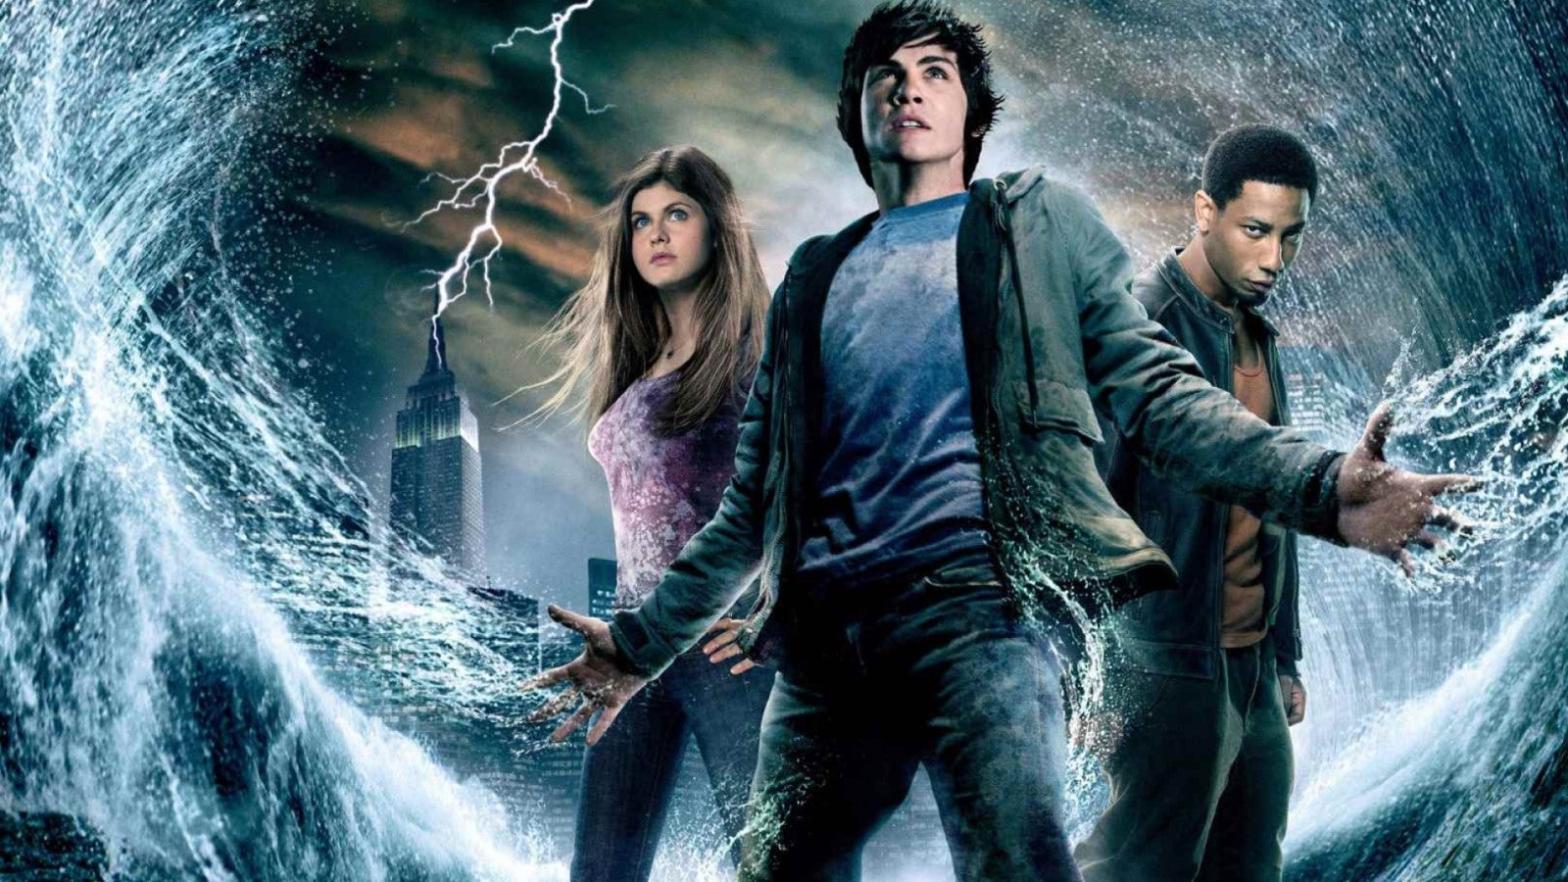 A poster for the first Percy Jackson movie, which has zero to do with the new series. (Image: Fox)